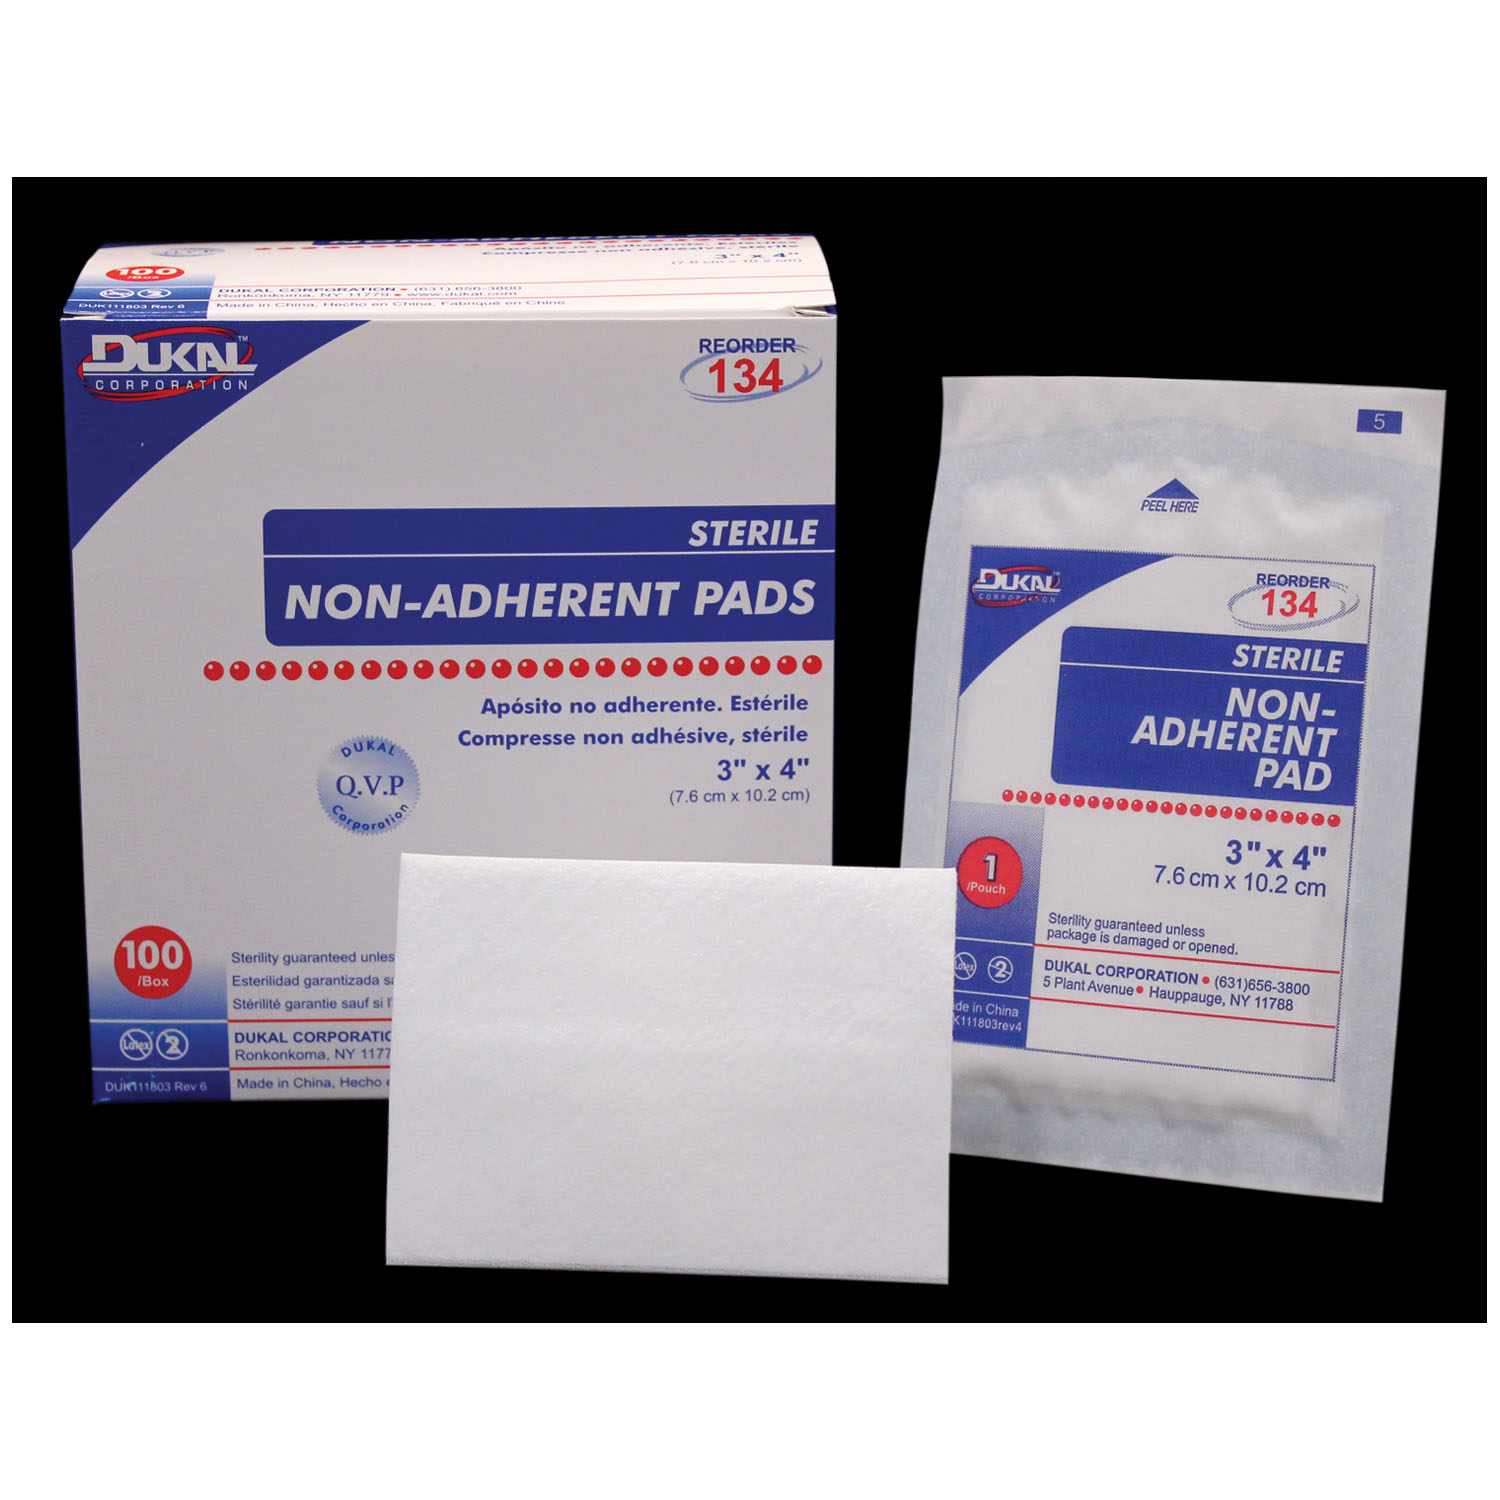 DUKAL NON-ADHERENT PADS : 134 BX $12.29 Stocked